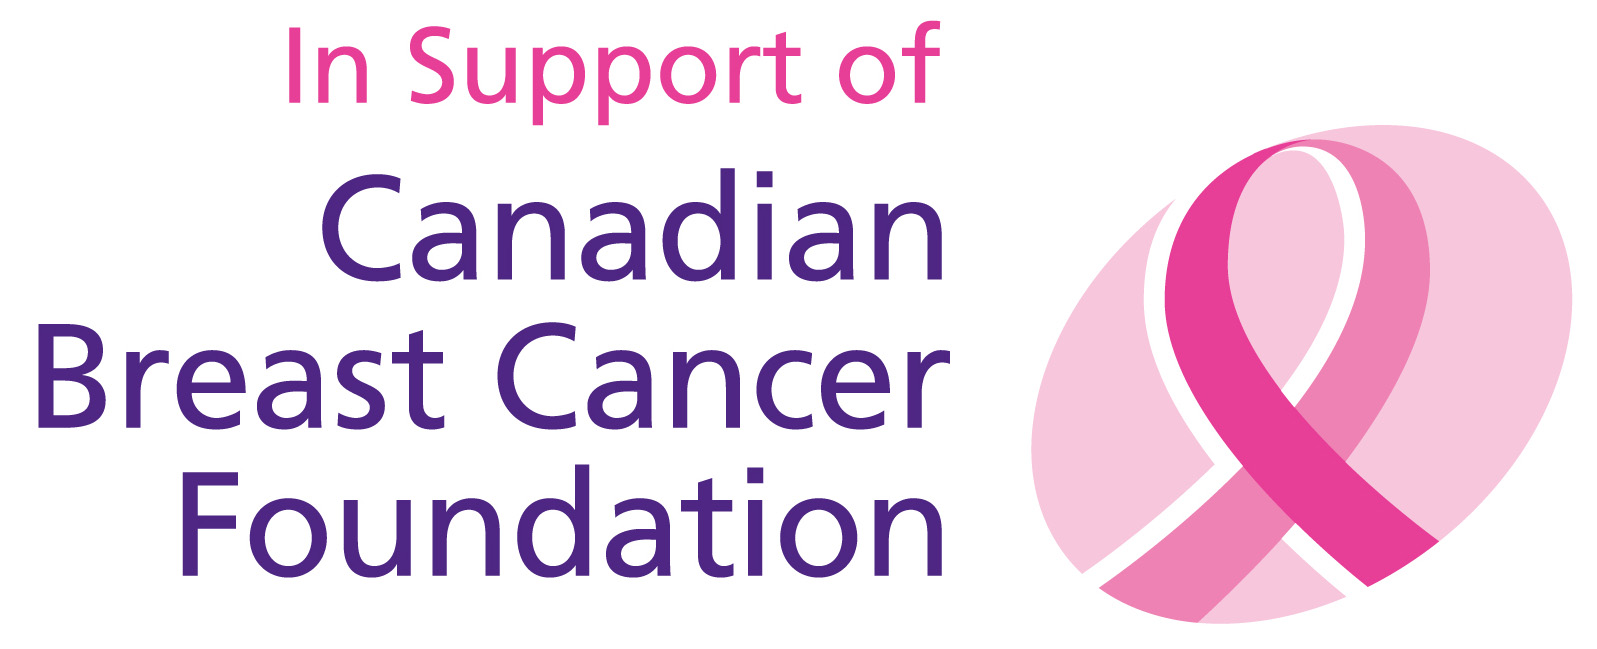 Canadian Breast Cancer Foundation Support logo